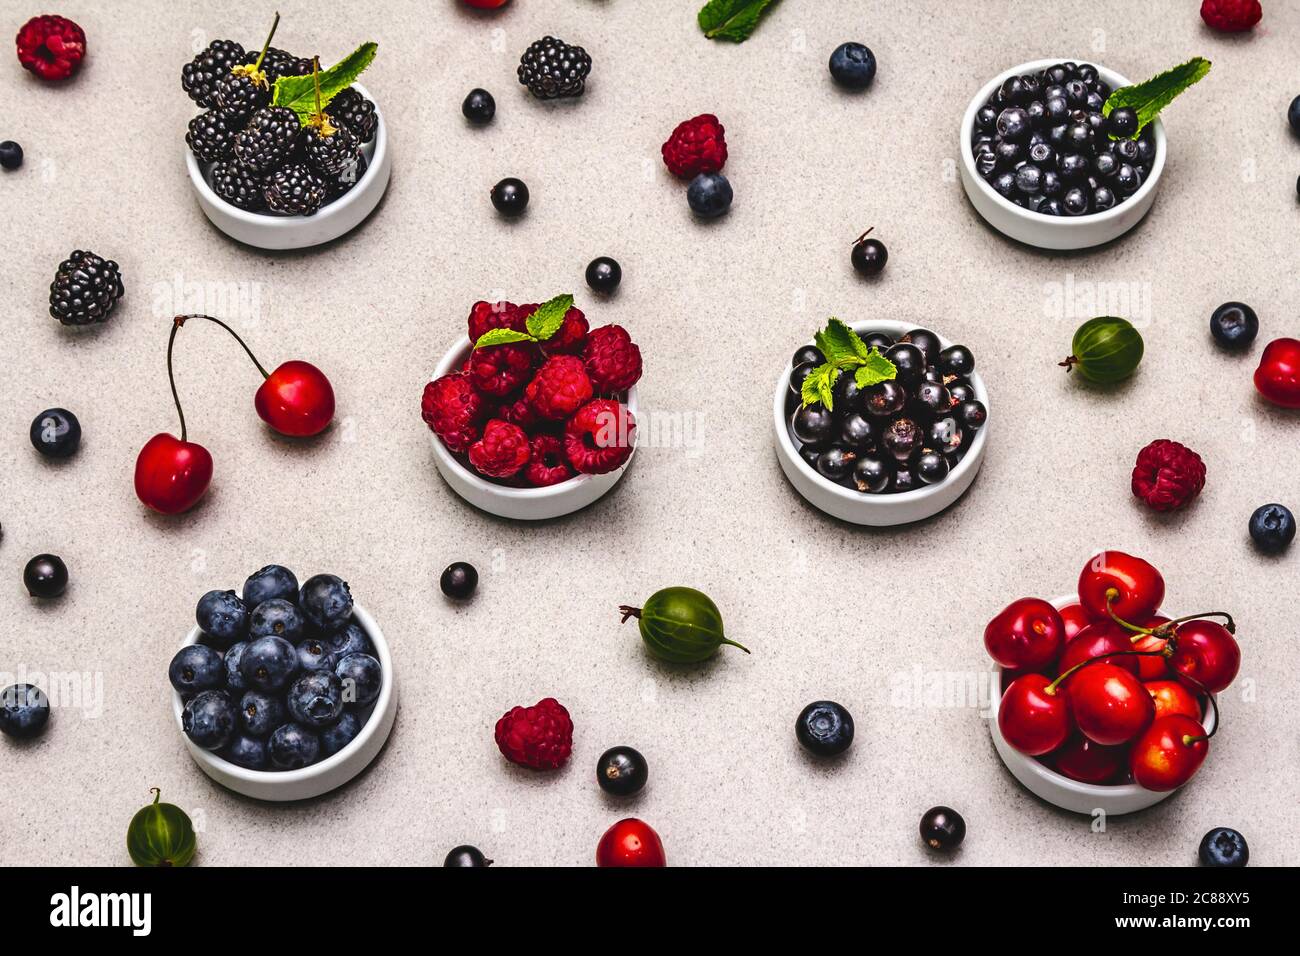 Assorted berries in bowls: bilberry, blueberry, currant, blackberry, cherry and raspberry. Stone concrete background Stock Photo